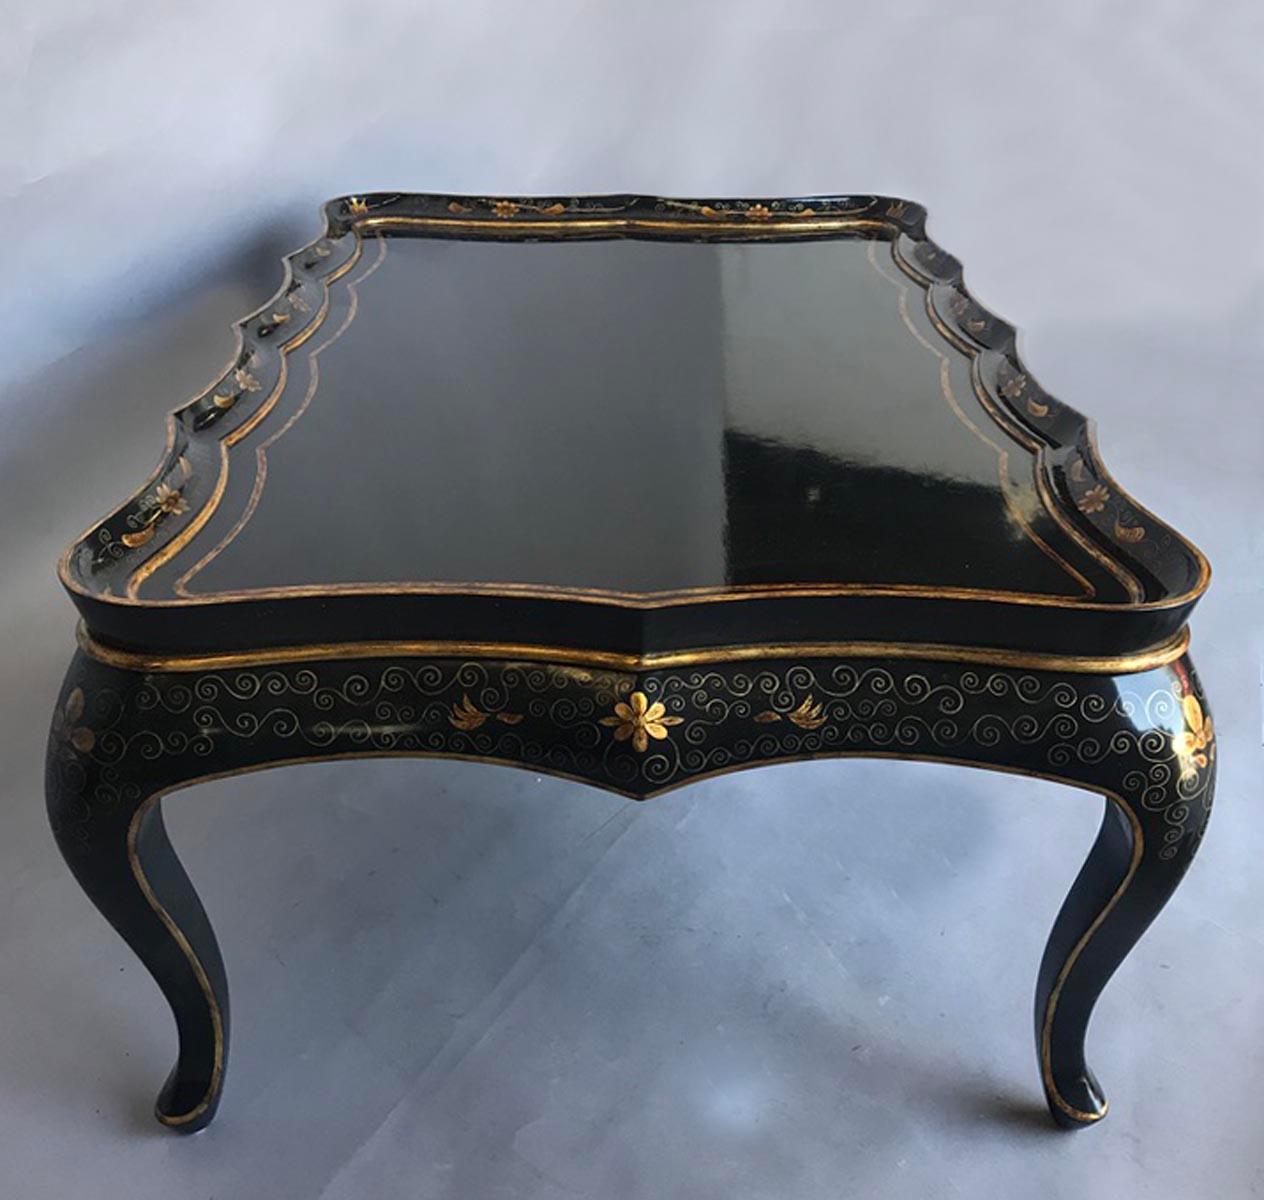 Chinoiserie Gilt Decorated Coffee Table